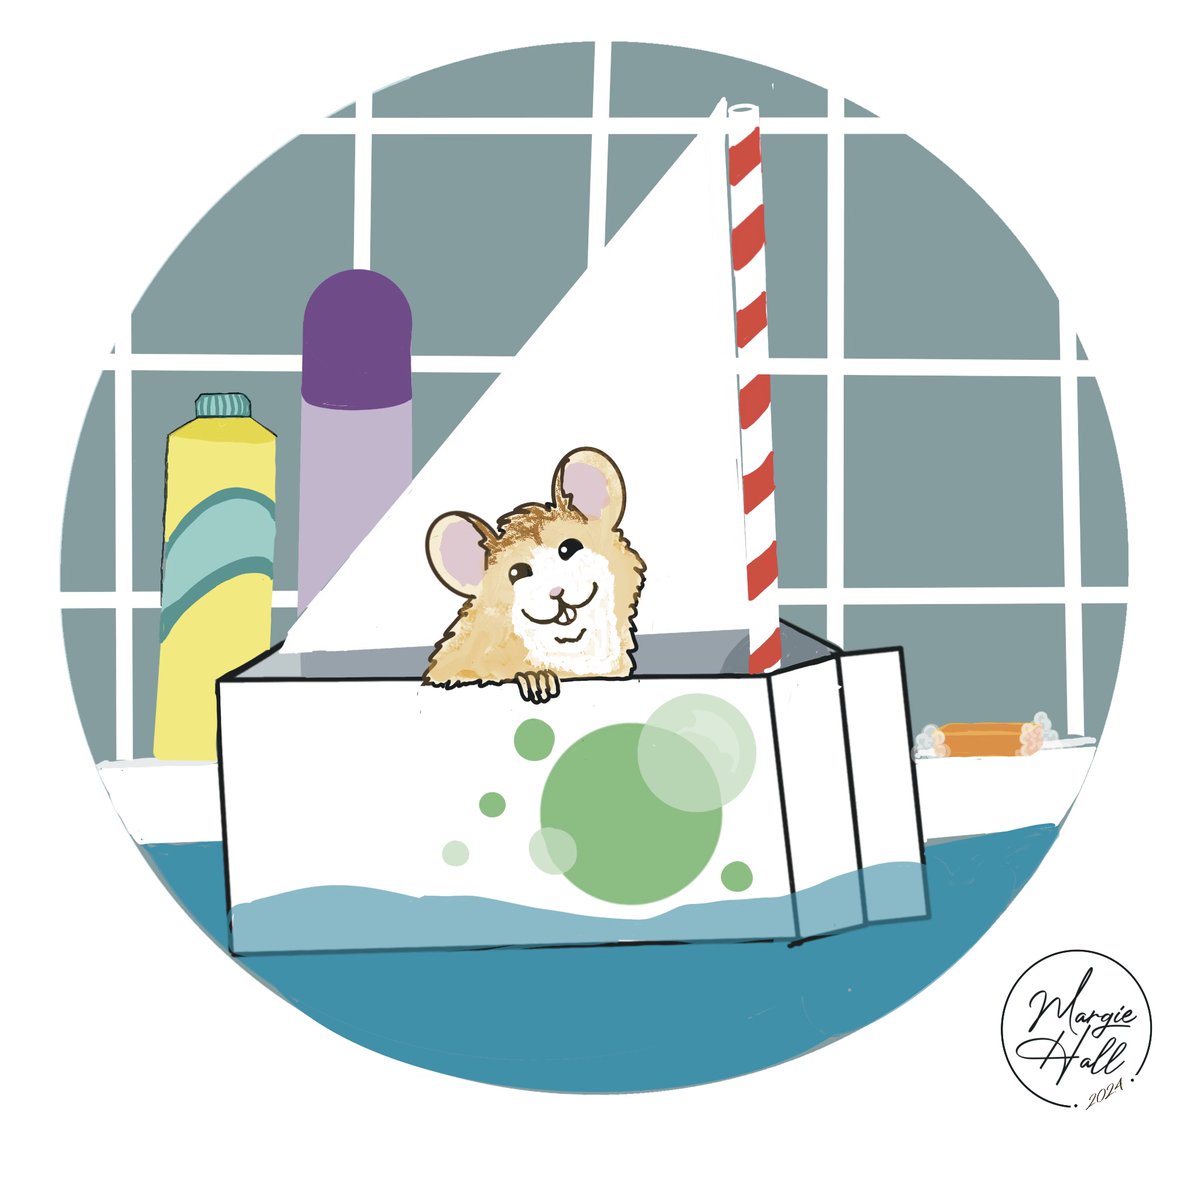 Animal Alphabets illustration challenge Prompt S is for sailboat. Butters the hamster loves taking his DIY sailboat for a spin around the tub. 

@AnimalAlphabets @animalalphab #AnimalAlphabets  #margie2092 
#sailboat 
#KidLitIllustration